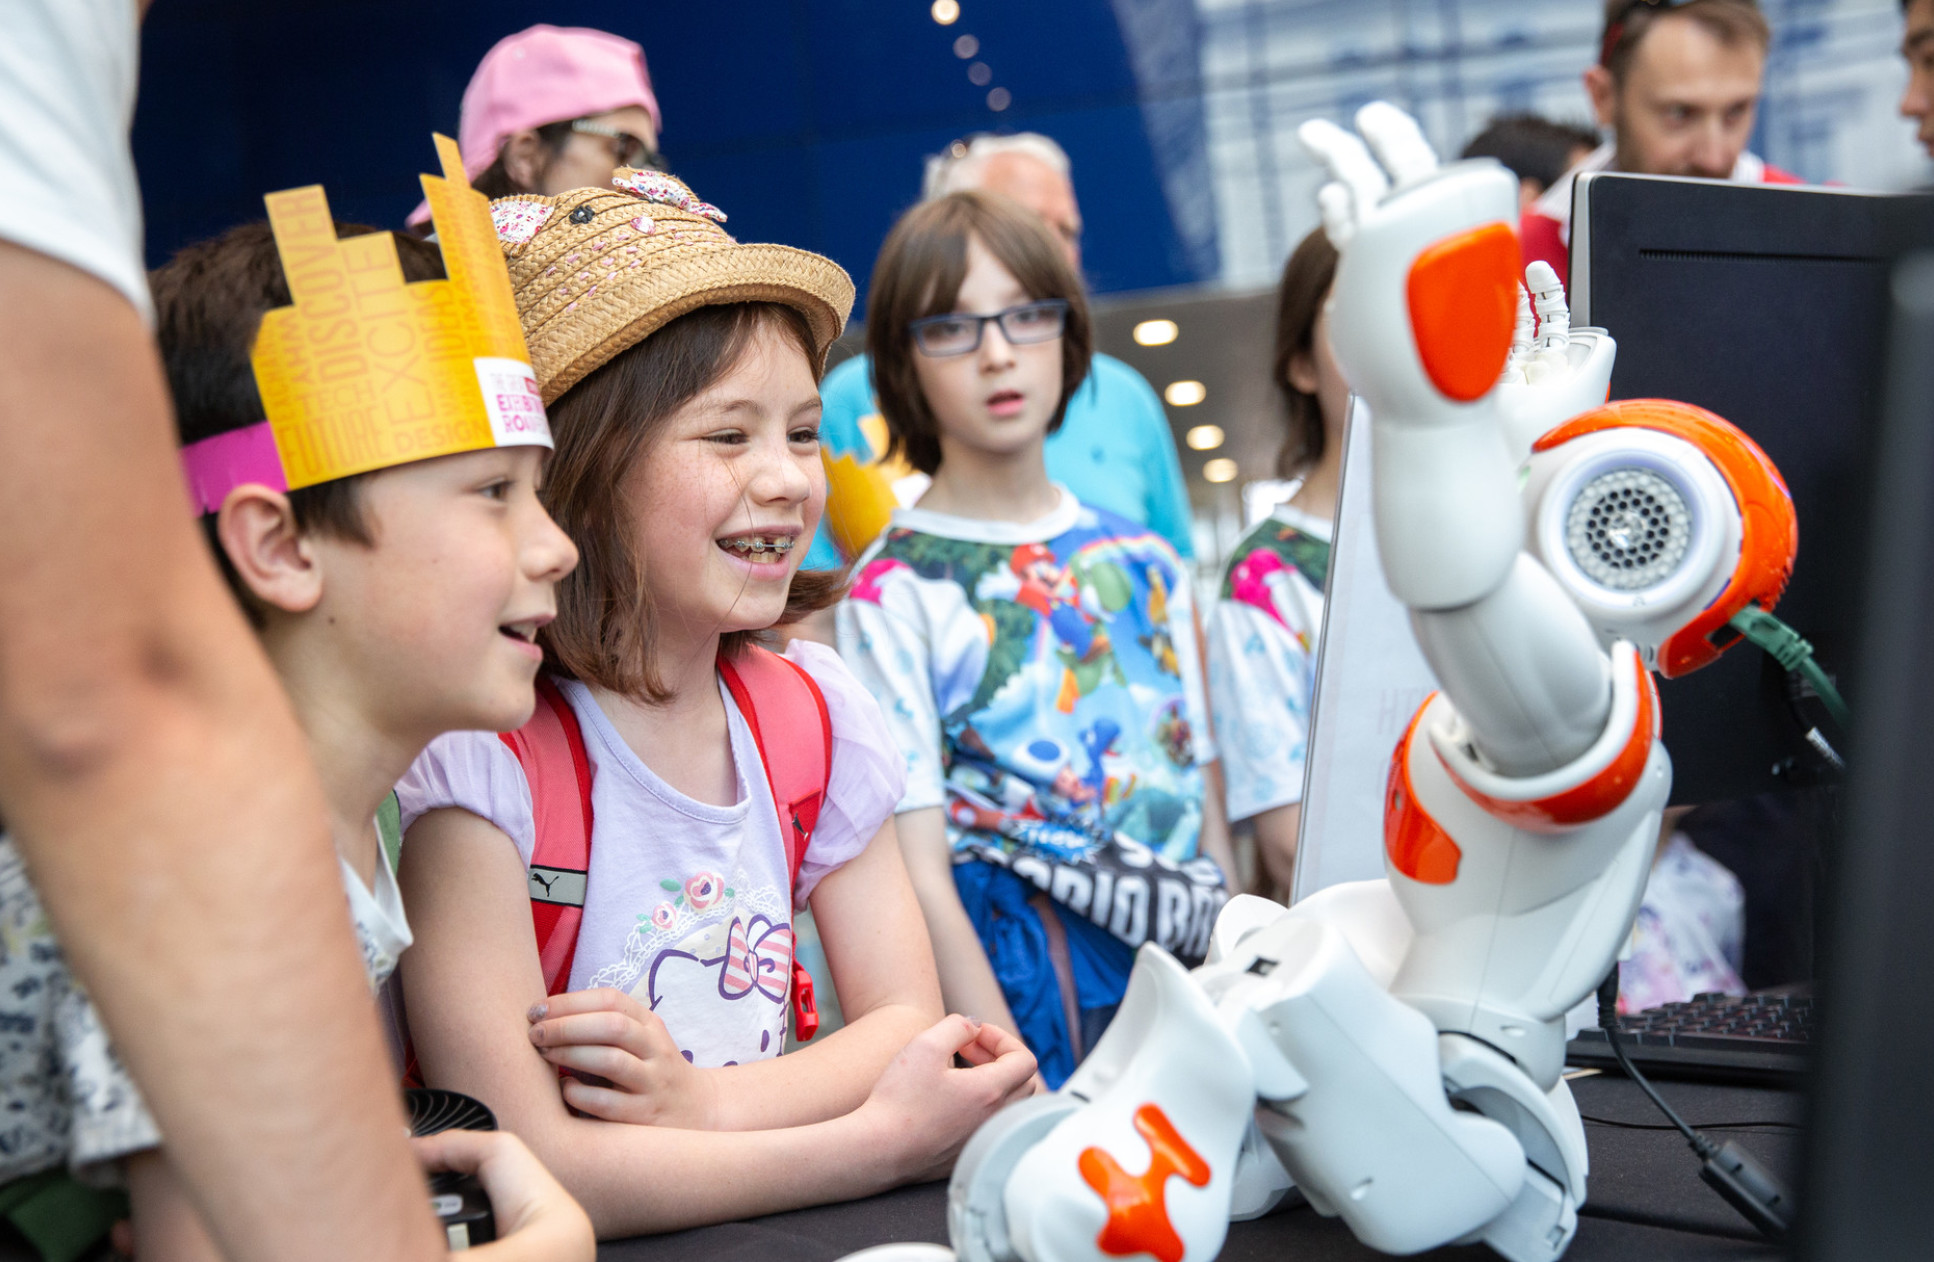 Children interacting with a robot